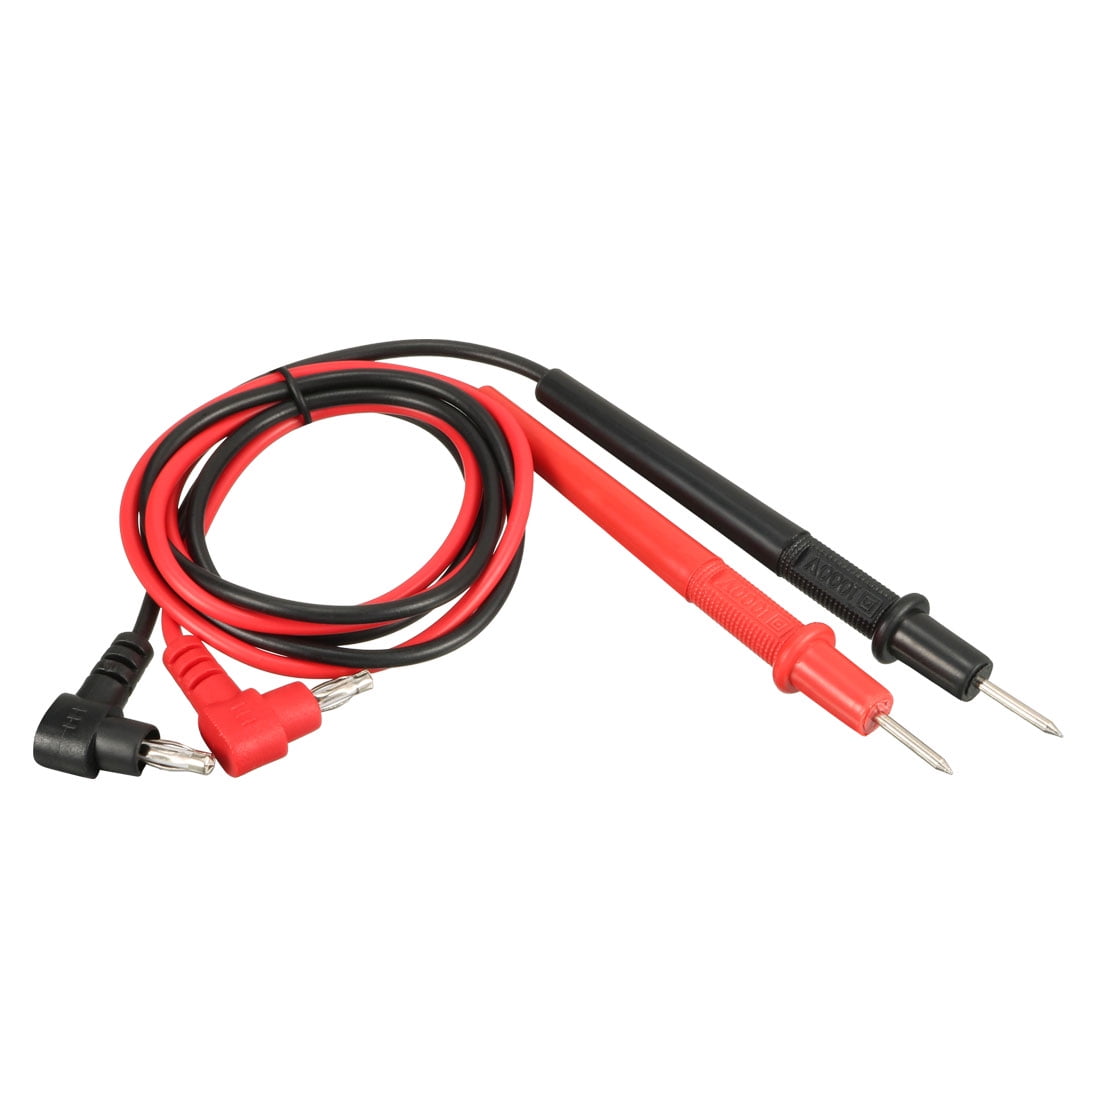 Hot 1 Pair Banana Plug To Test Hook Clip Probe Lead Cable For Multimeter new BA 